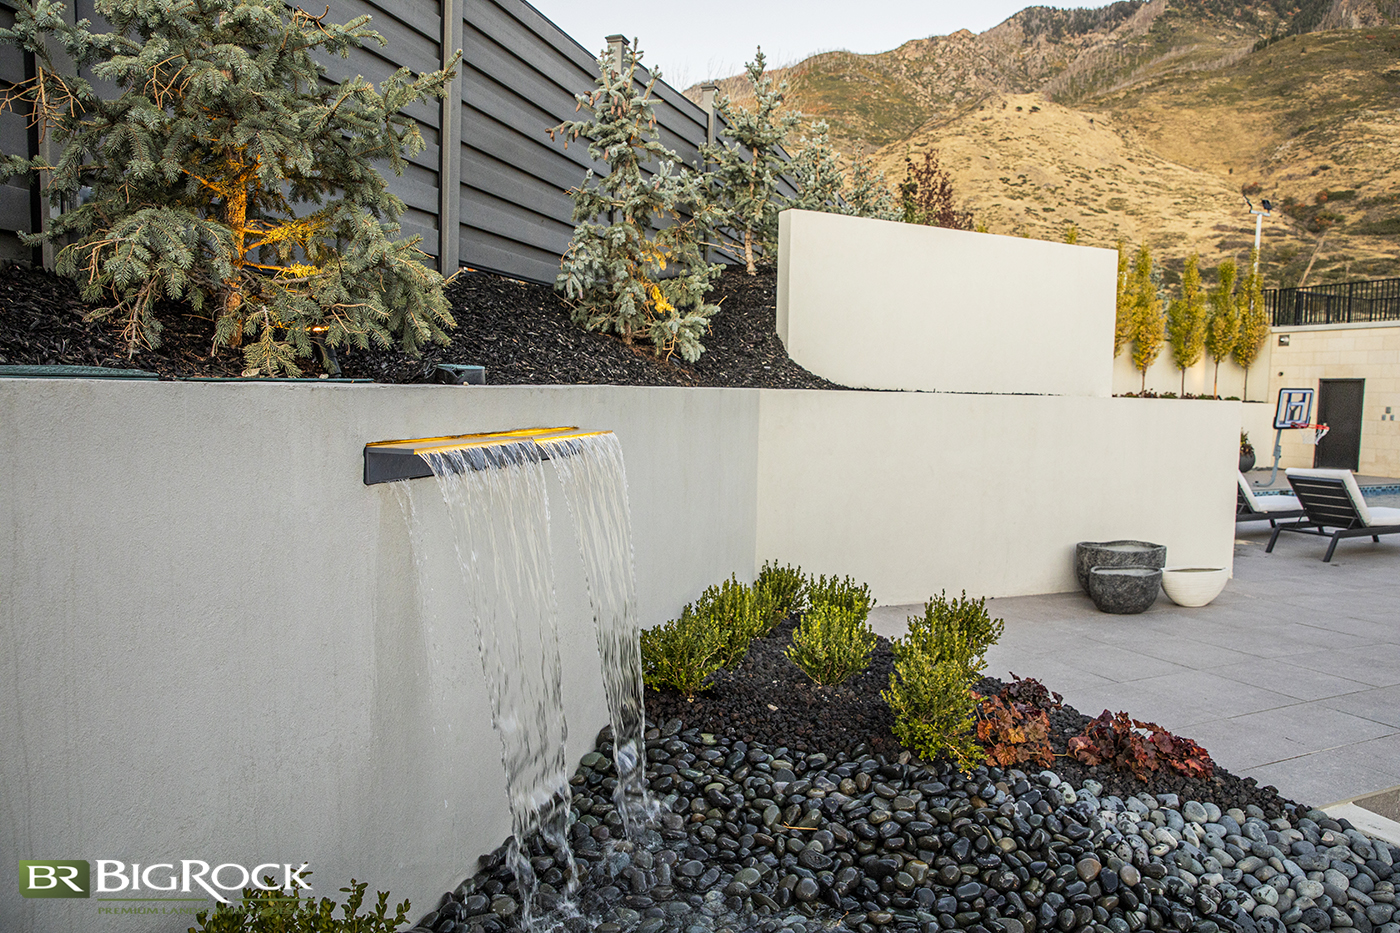 Water features add a bit of flare and pop to any outdoor space. Often overlooked in a landscape design, water features do not need to be grandiose waterfalls spilling over massive boulders to make an impact.